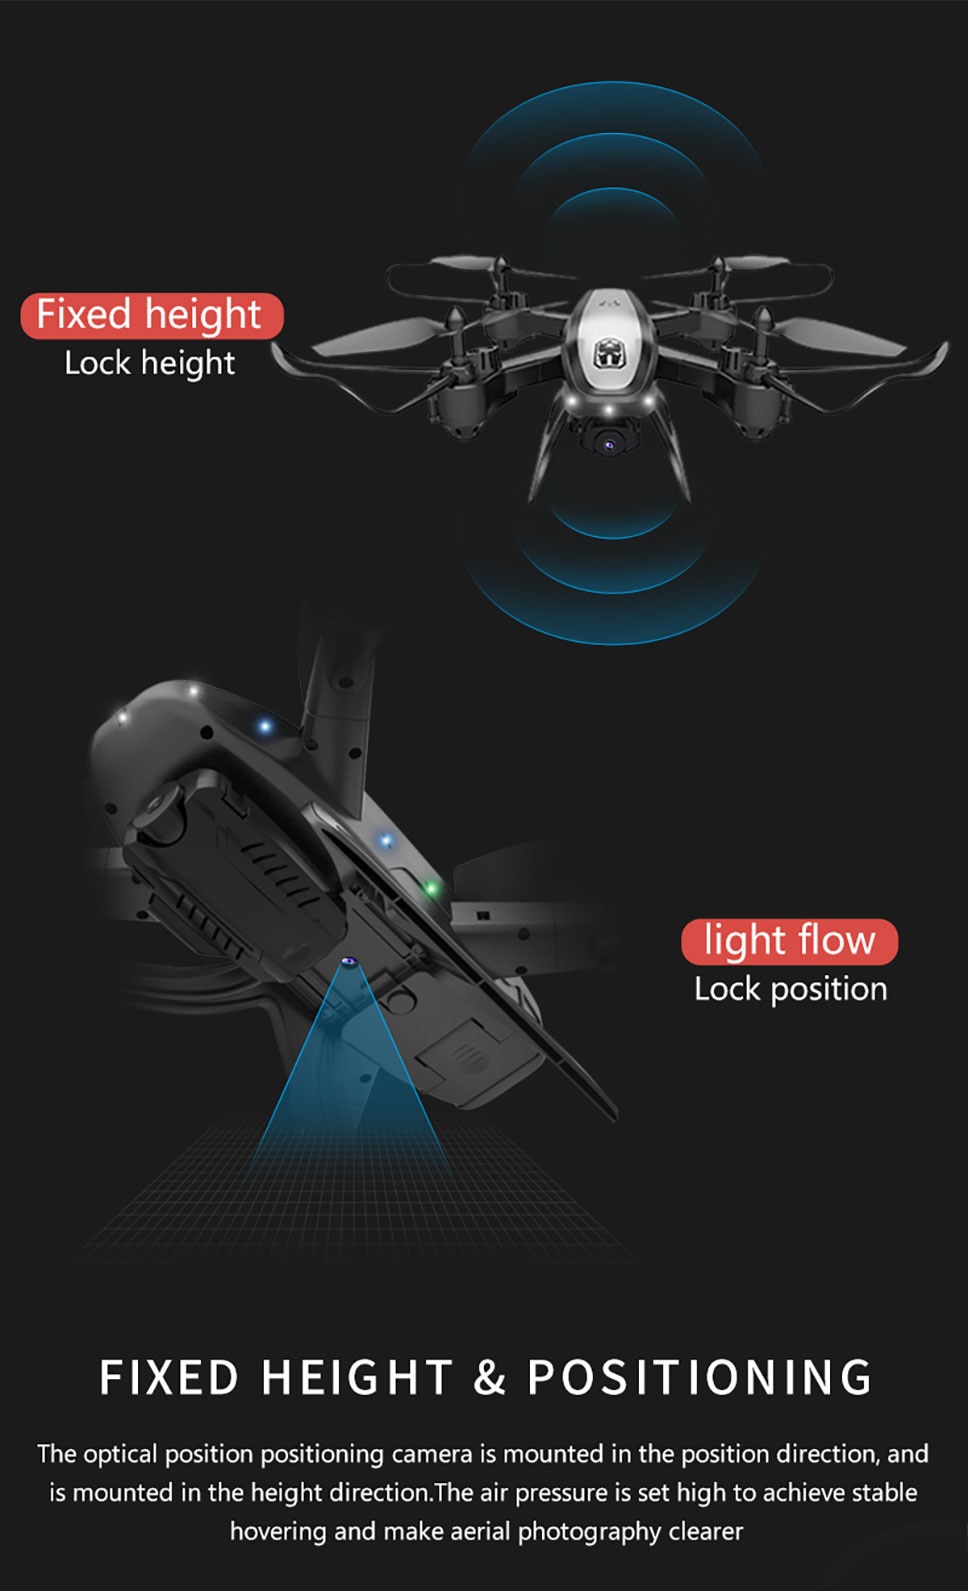 Drone KY909 HD 4K WiFi video live fpv drone light flow keep height quad-axis aircraft one-button take-off drone with camera